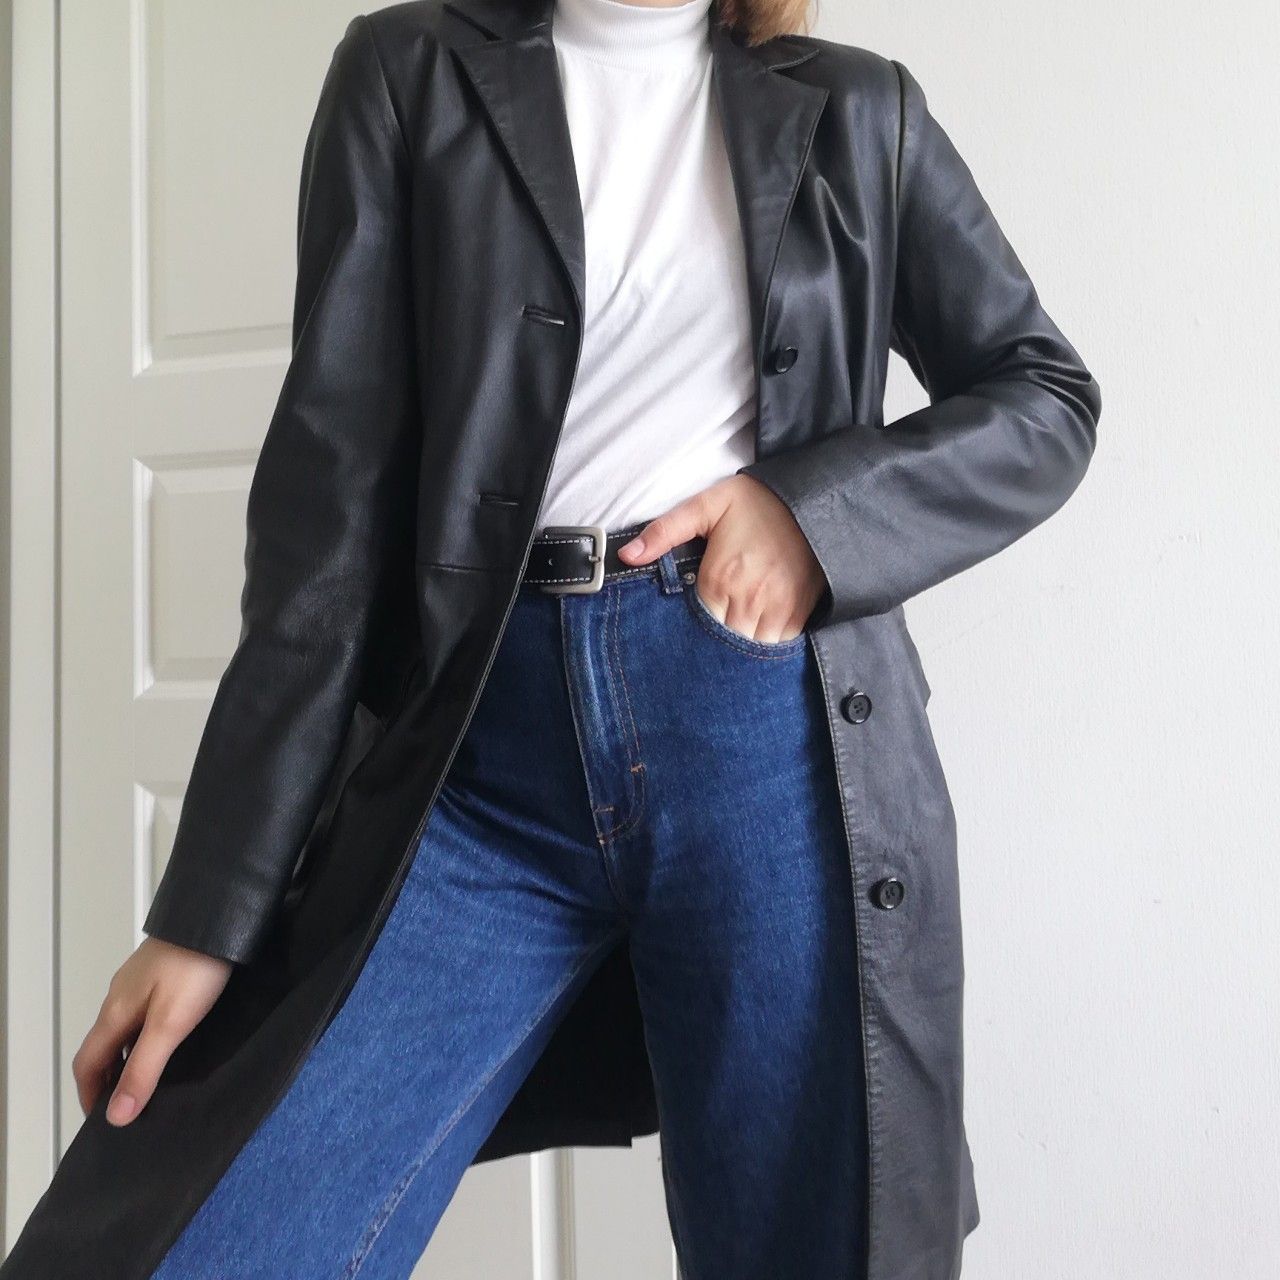 16 style 90s leather jackets ideas